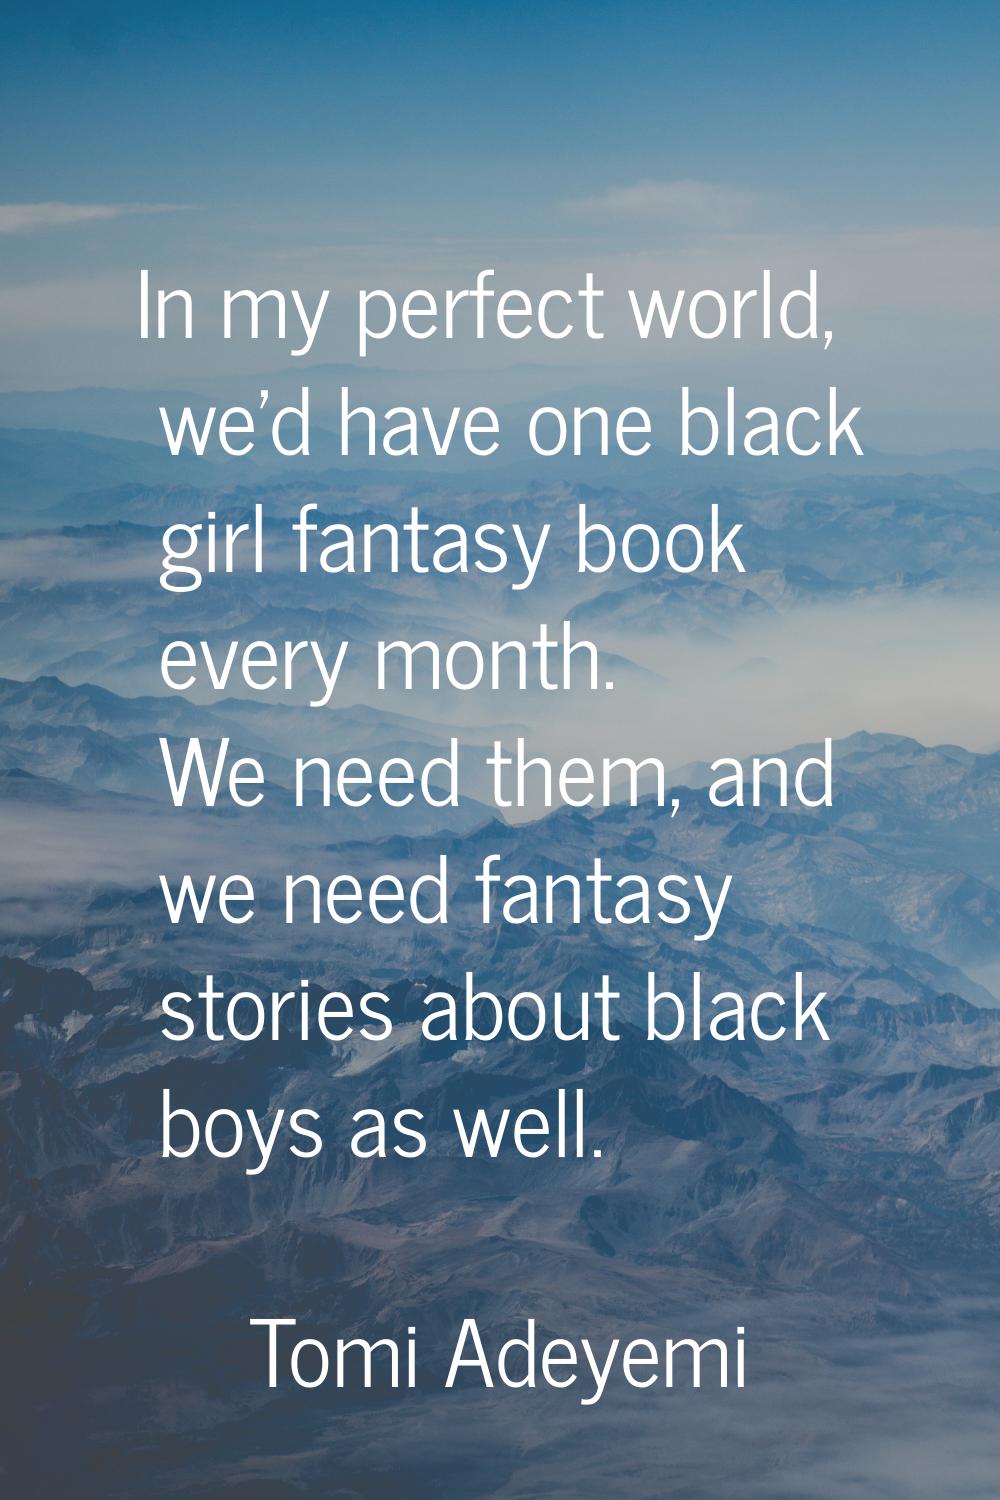 In my perfect world, we'd have one black girl fantasy book every month. We need them, and we need f